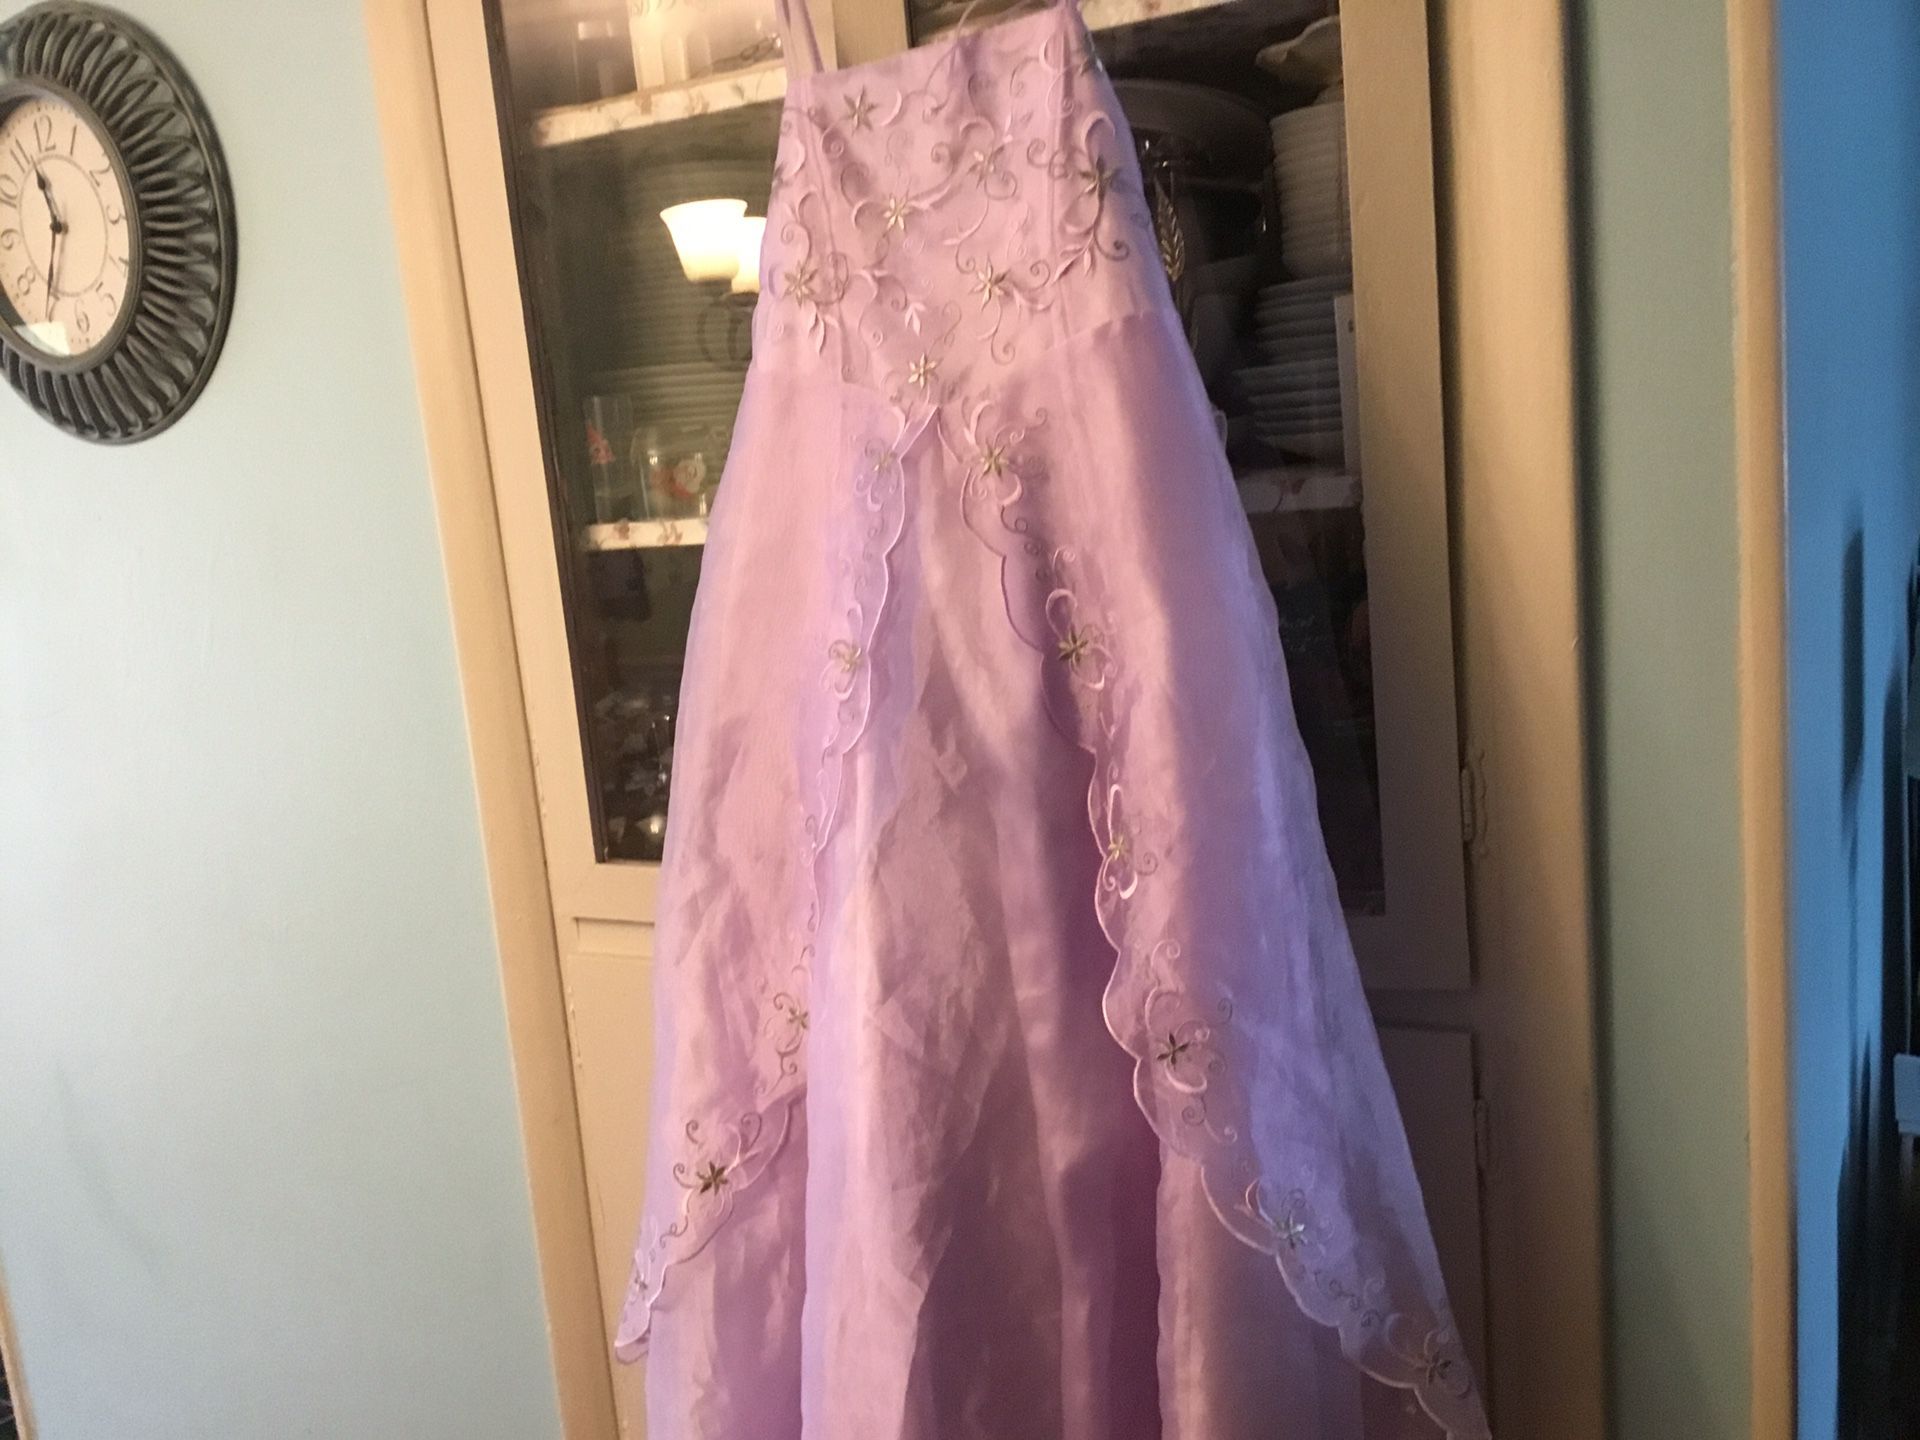 Girls size 14 Easter dresses 9$ each one lilac and one ivory